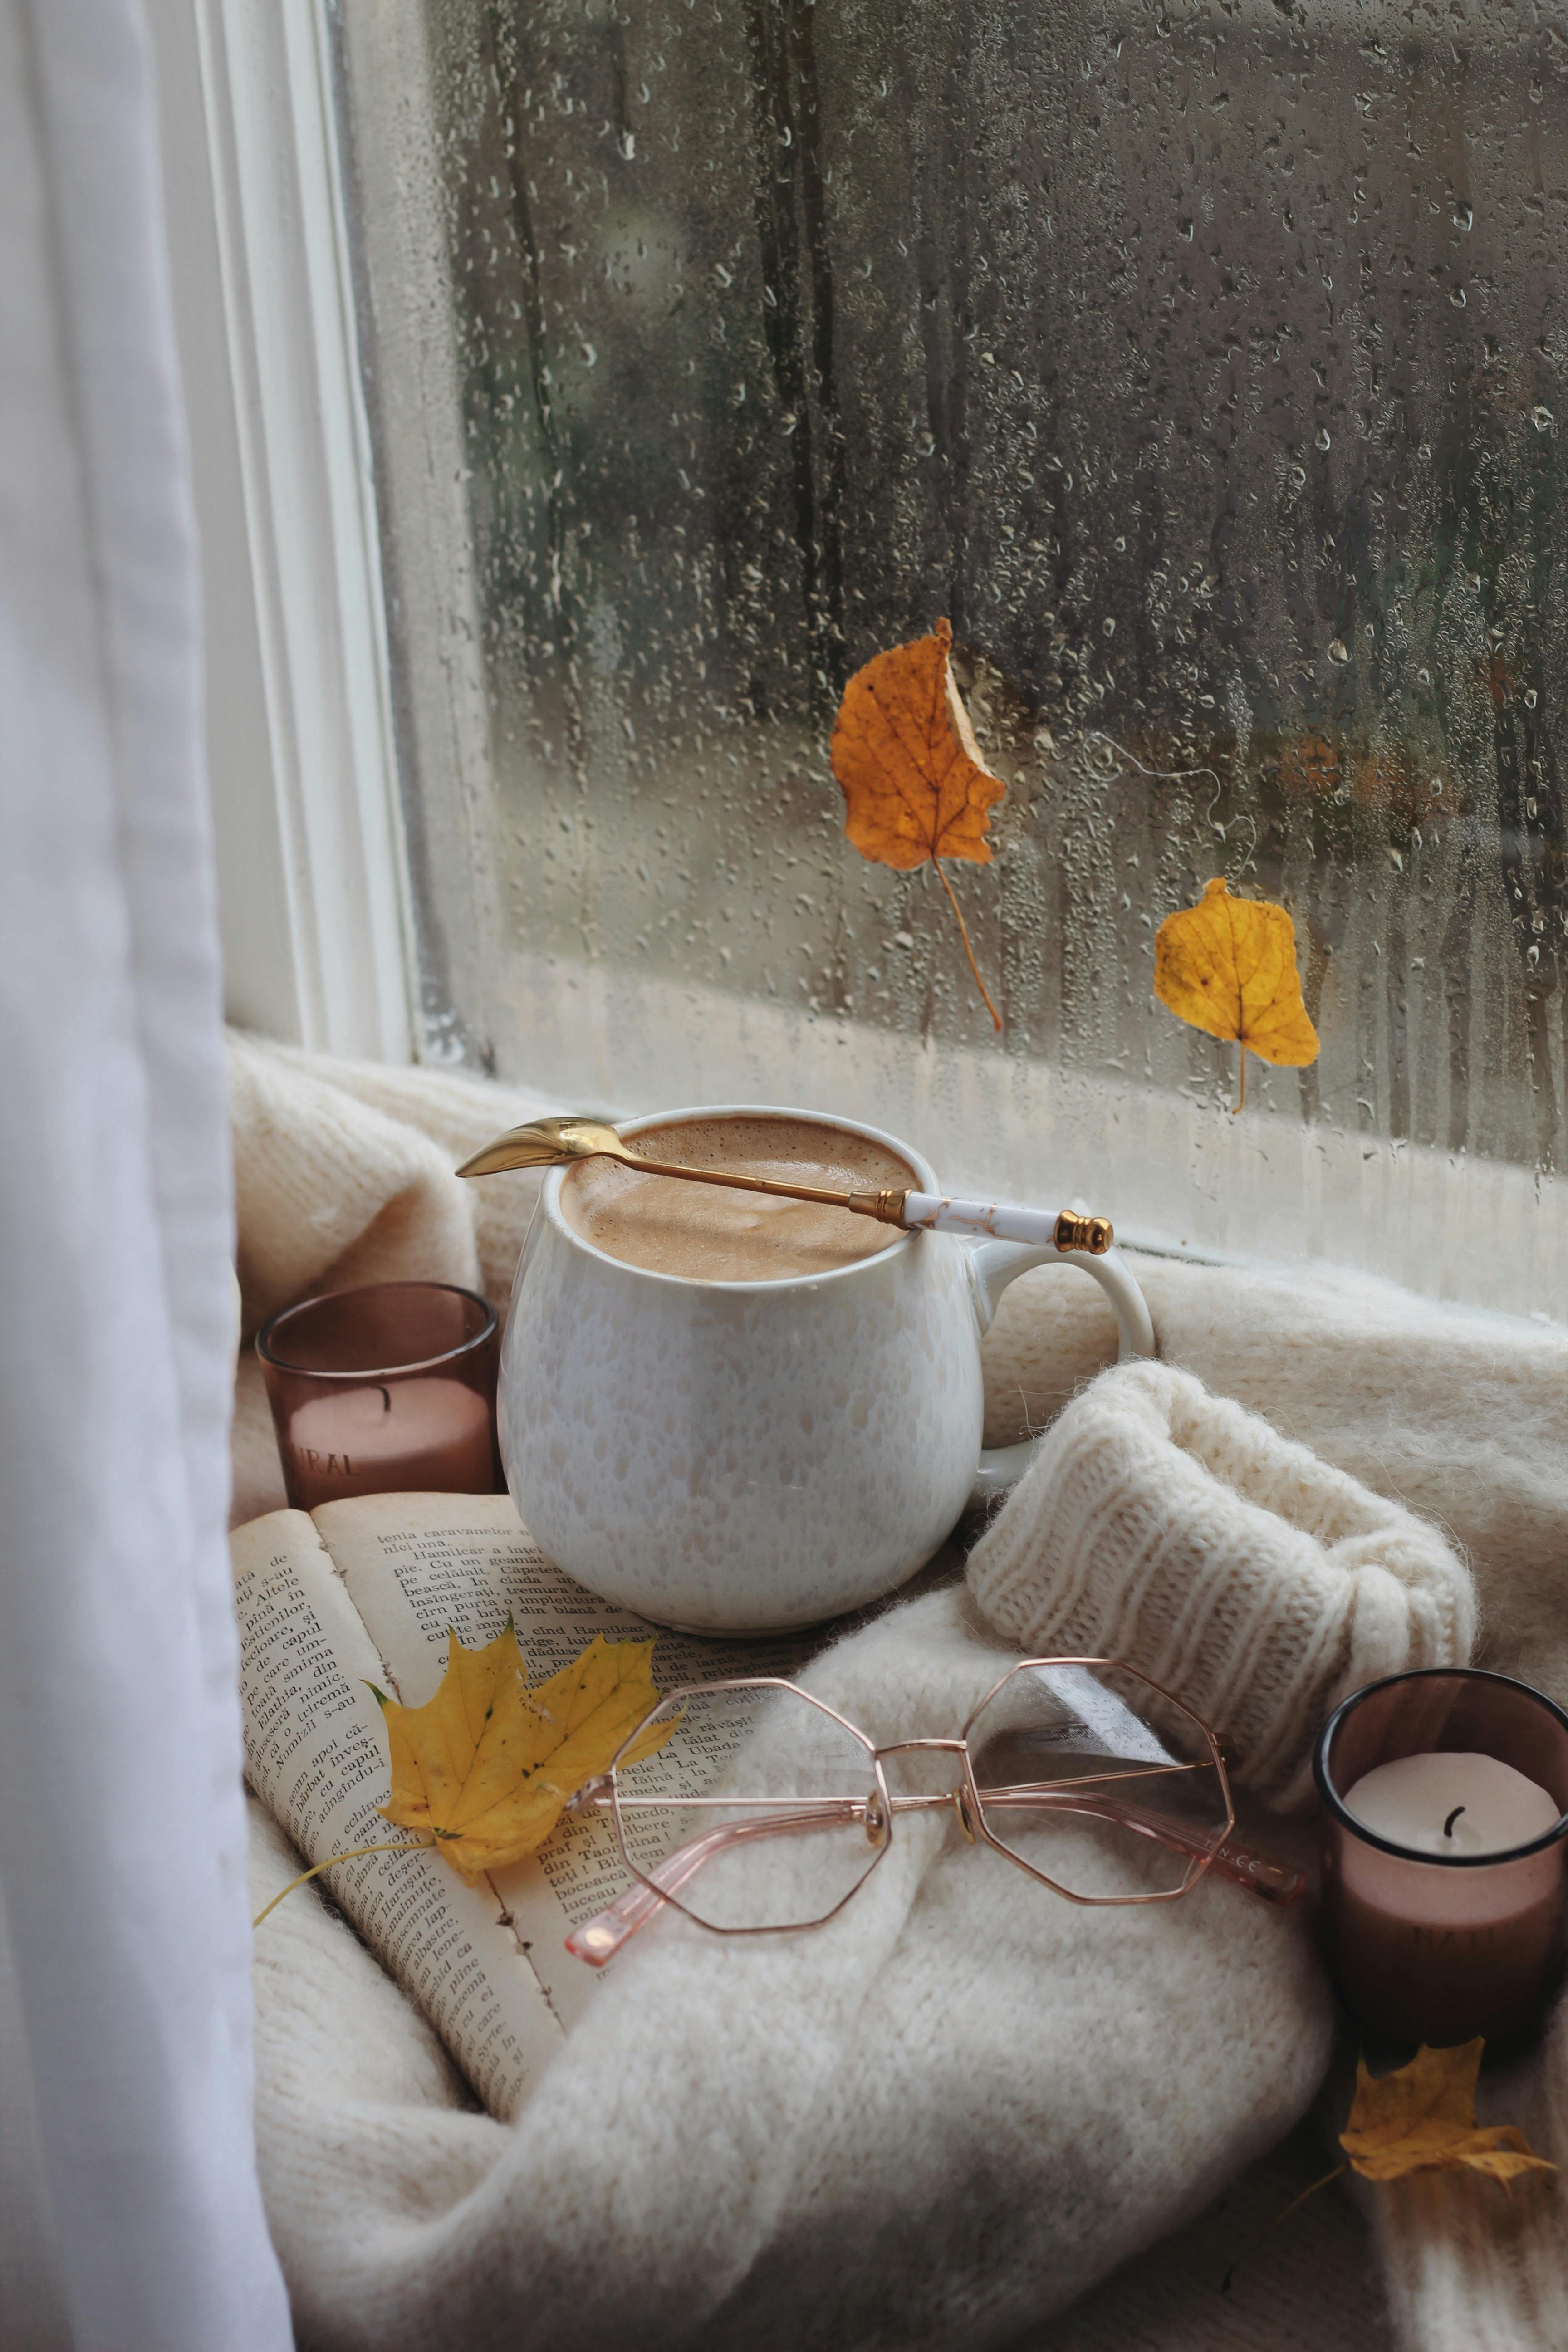 coffee glasses and sweater on book in autumn scene